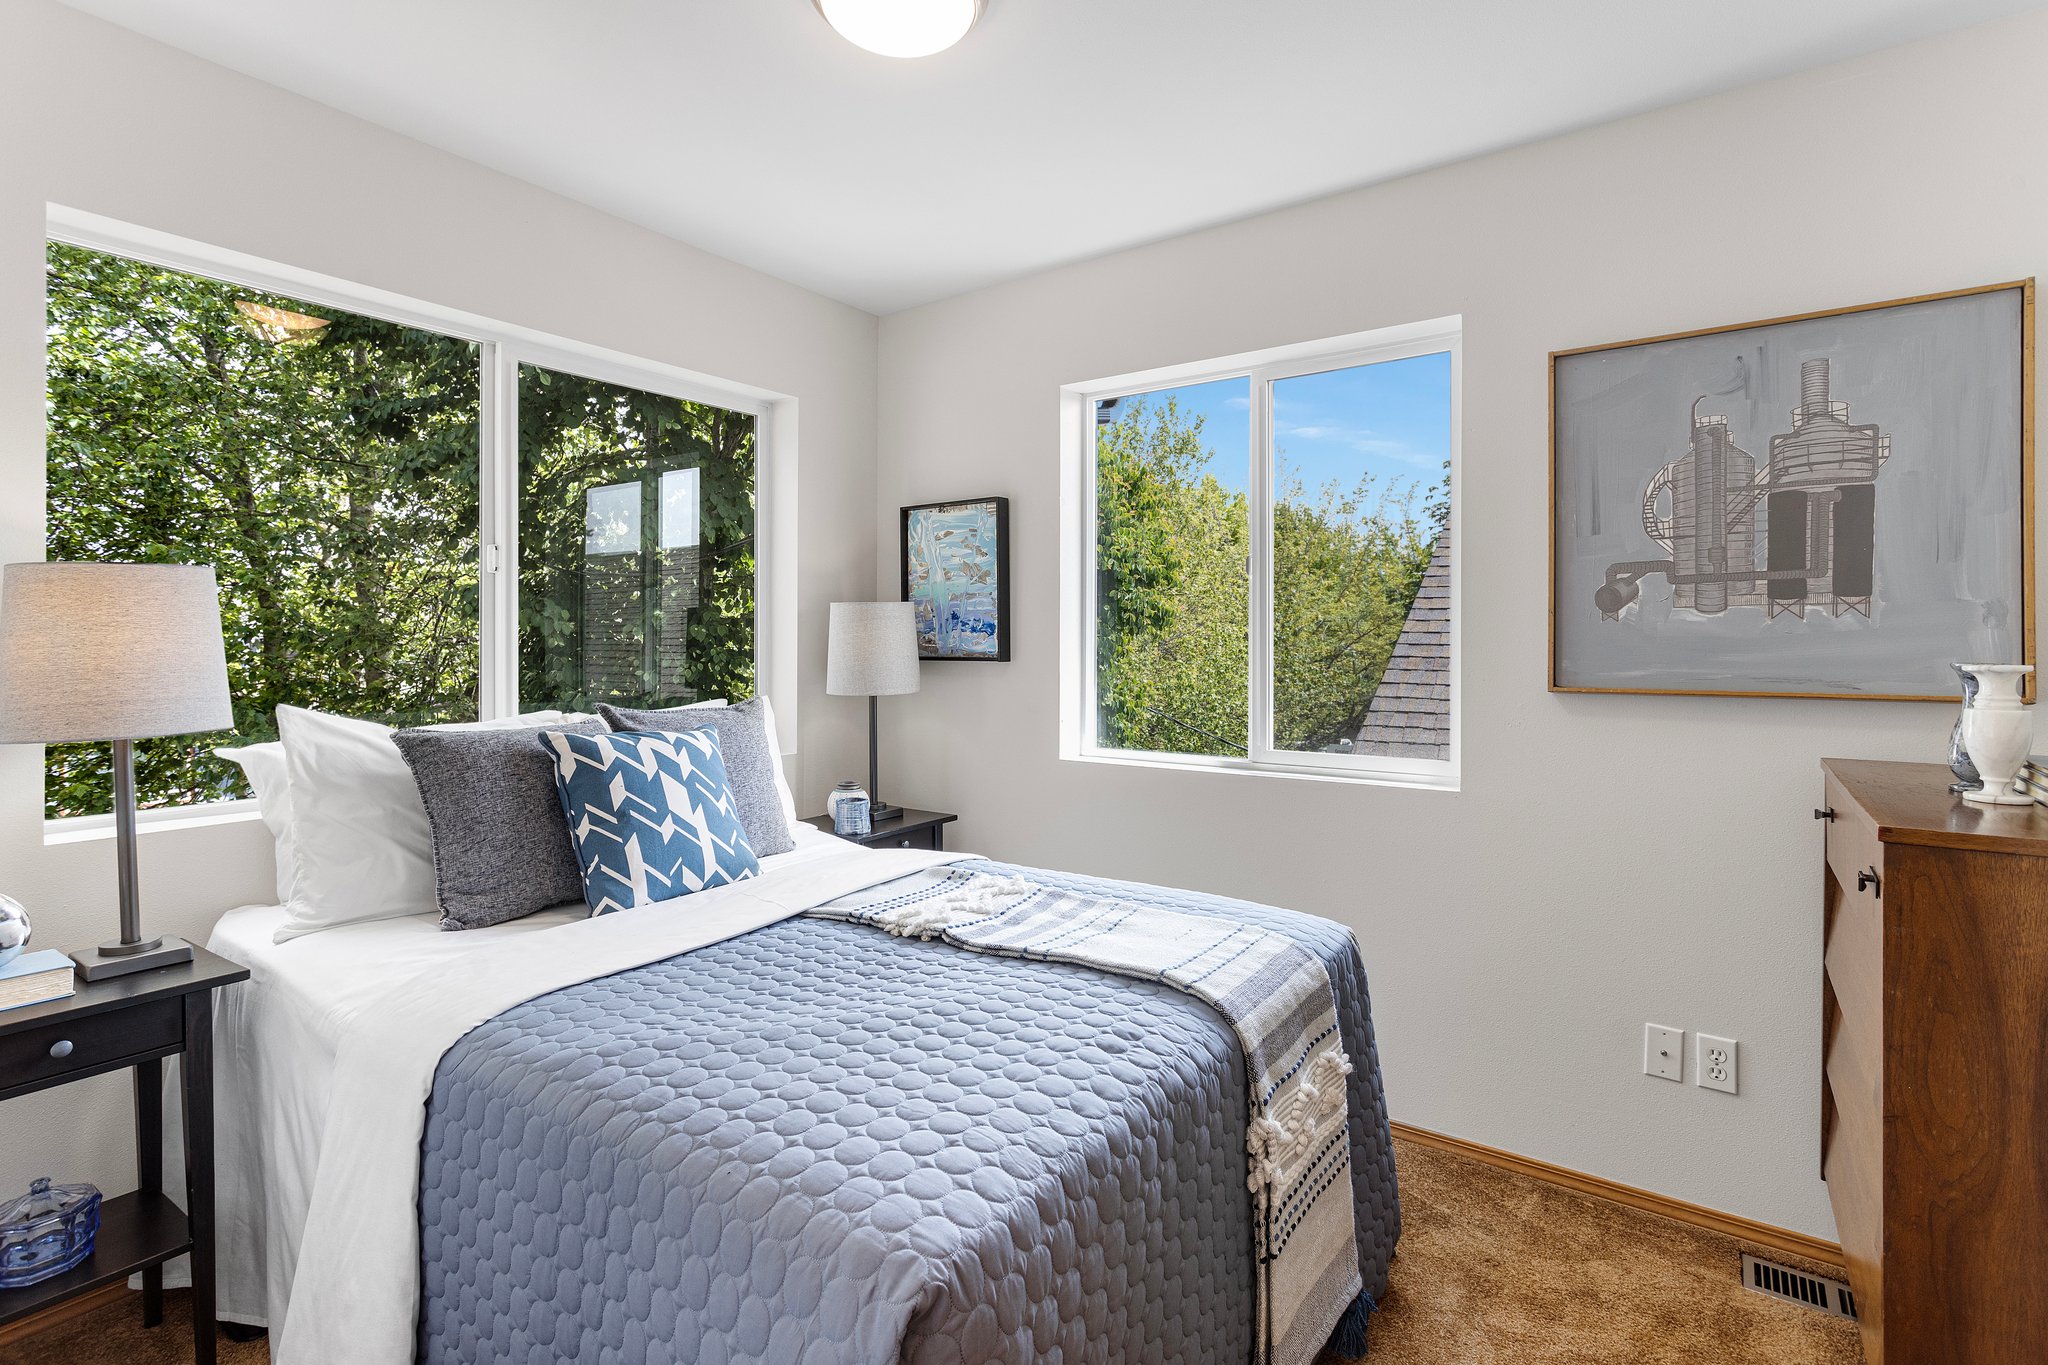 The spacious front bedroom has a treehouse feel with windows on two sides that offer views of the front courtyard and morning light from the east. It is conveniently located across the hall from the shared bathroom.